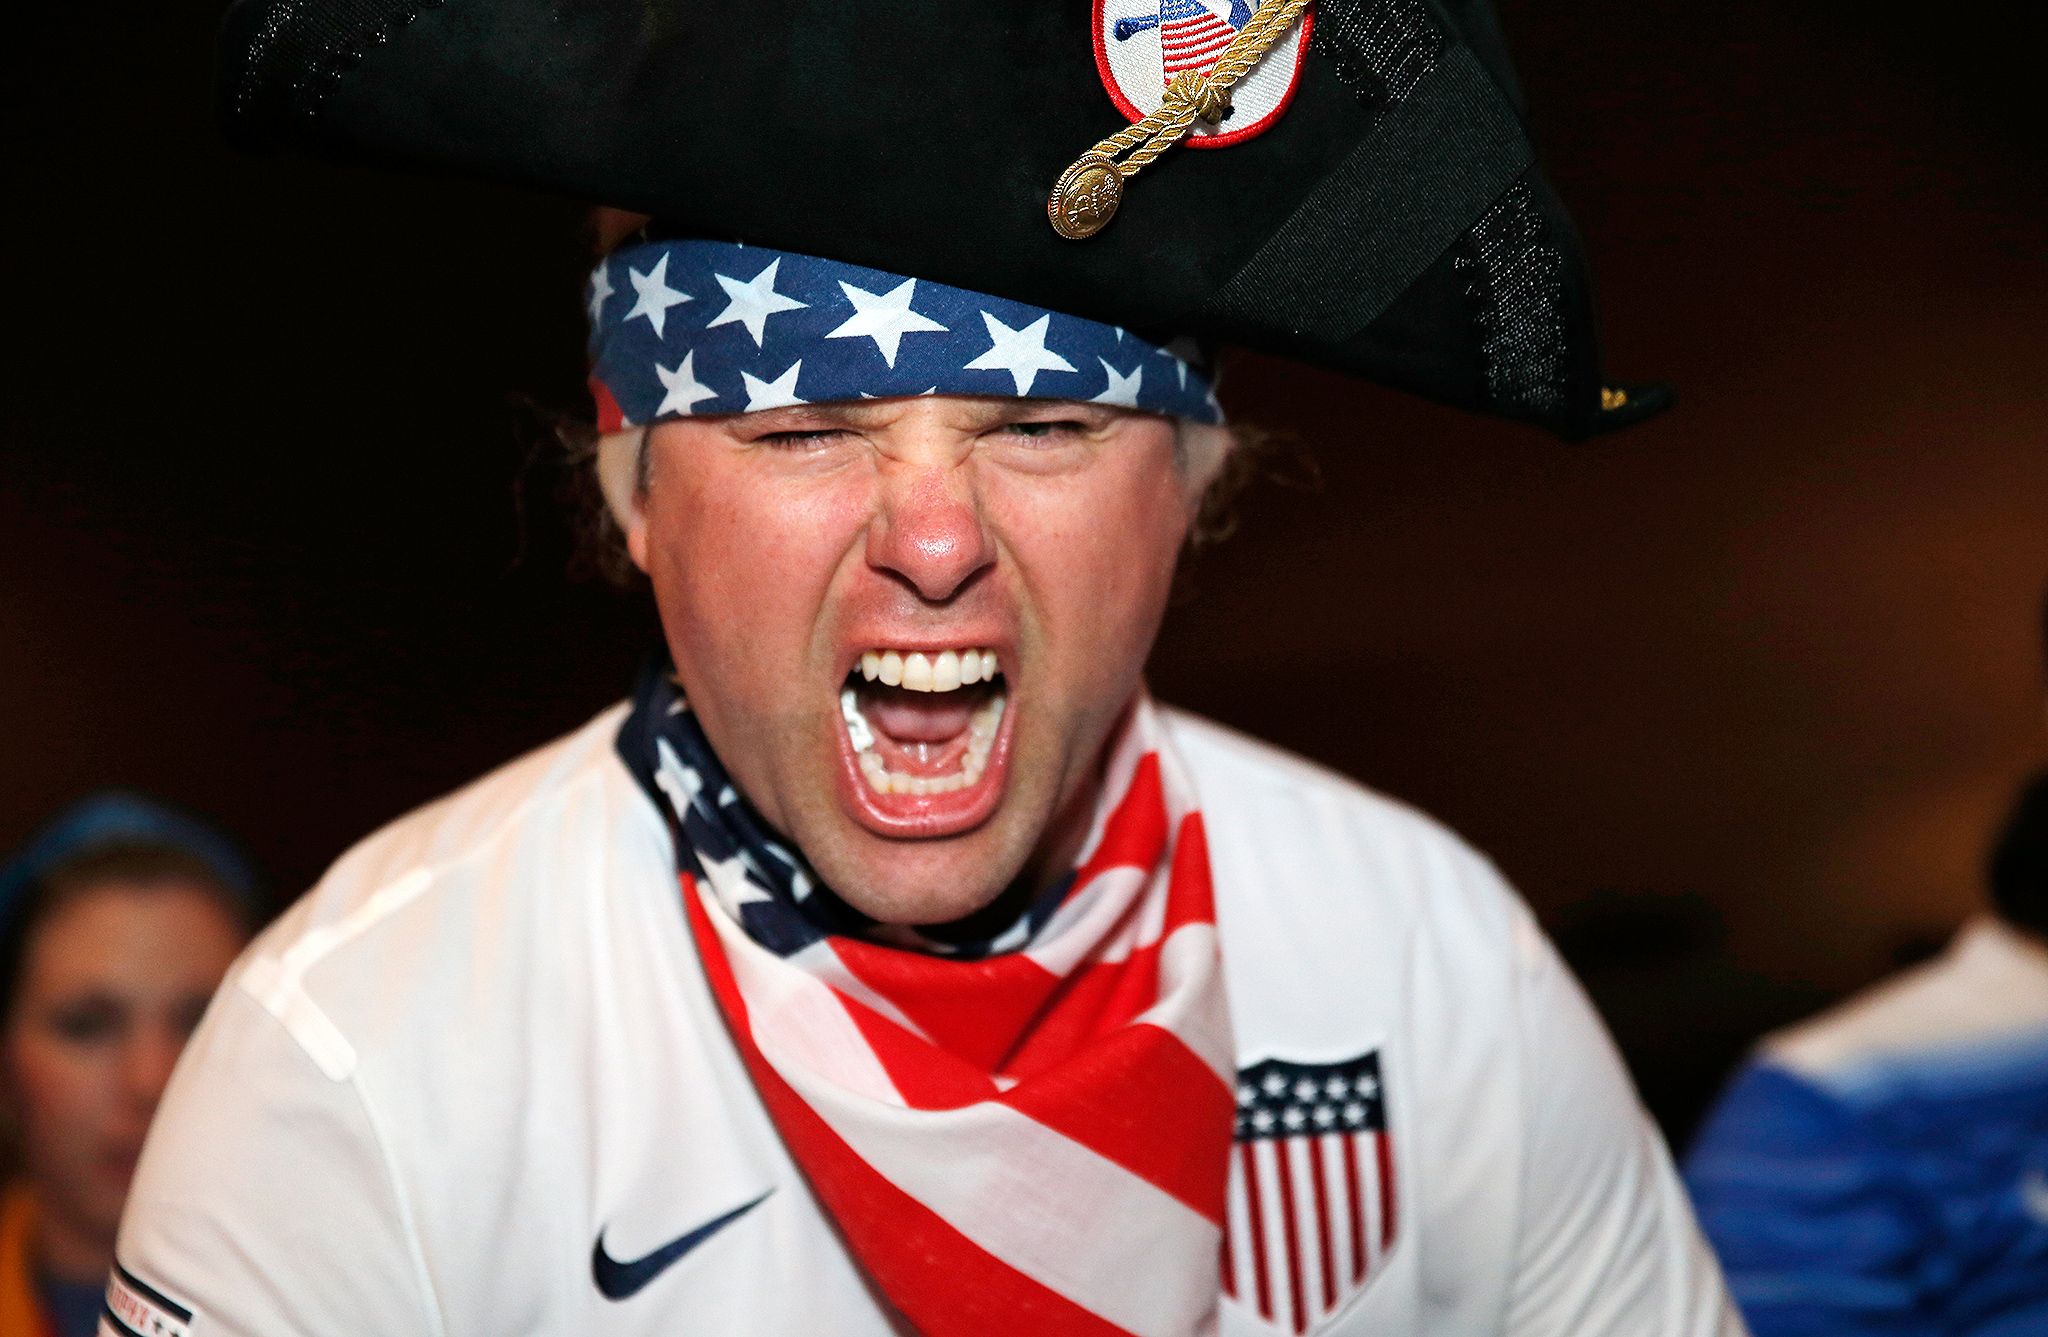 Dress rehearsal Photos With the American Outlaws for USA vs. Mexico